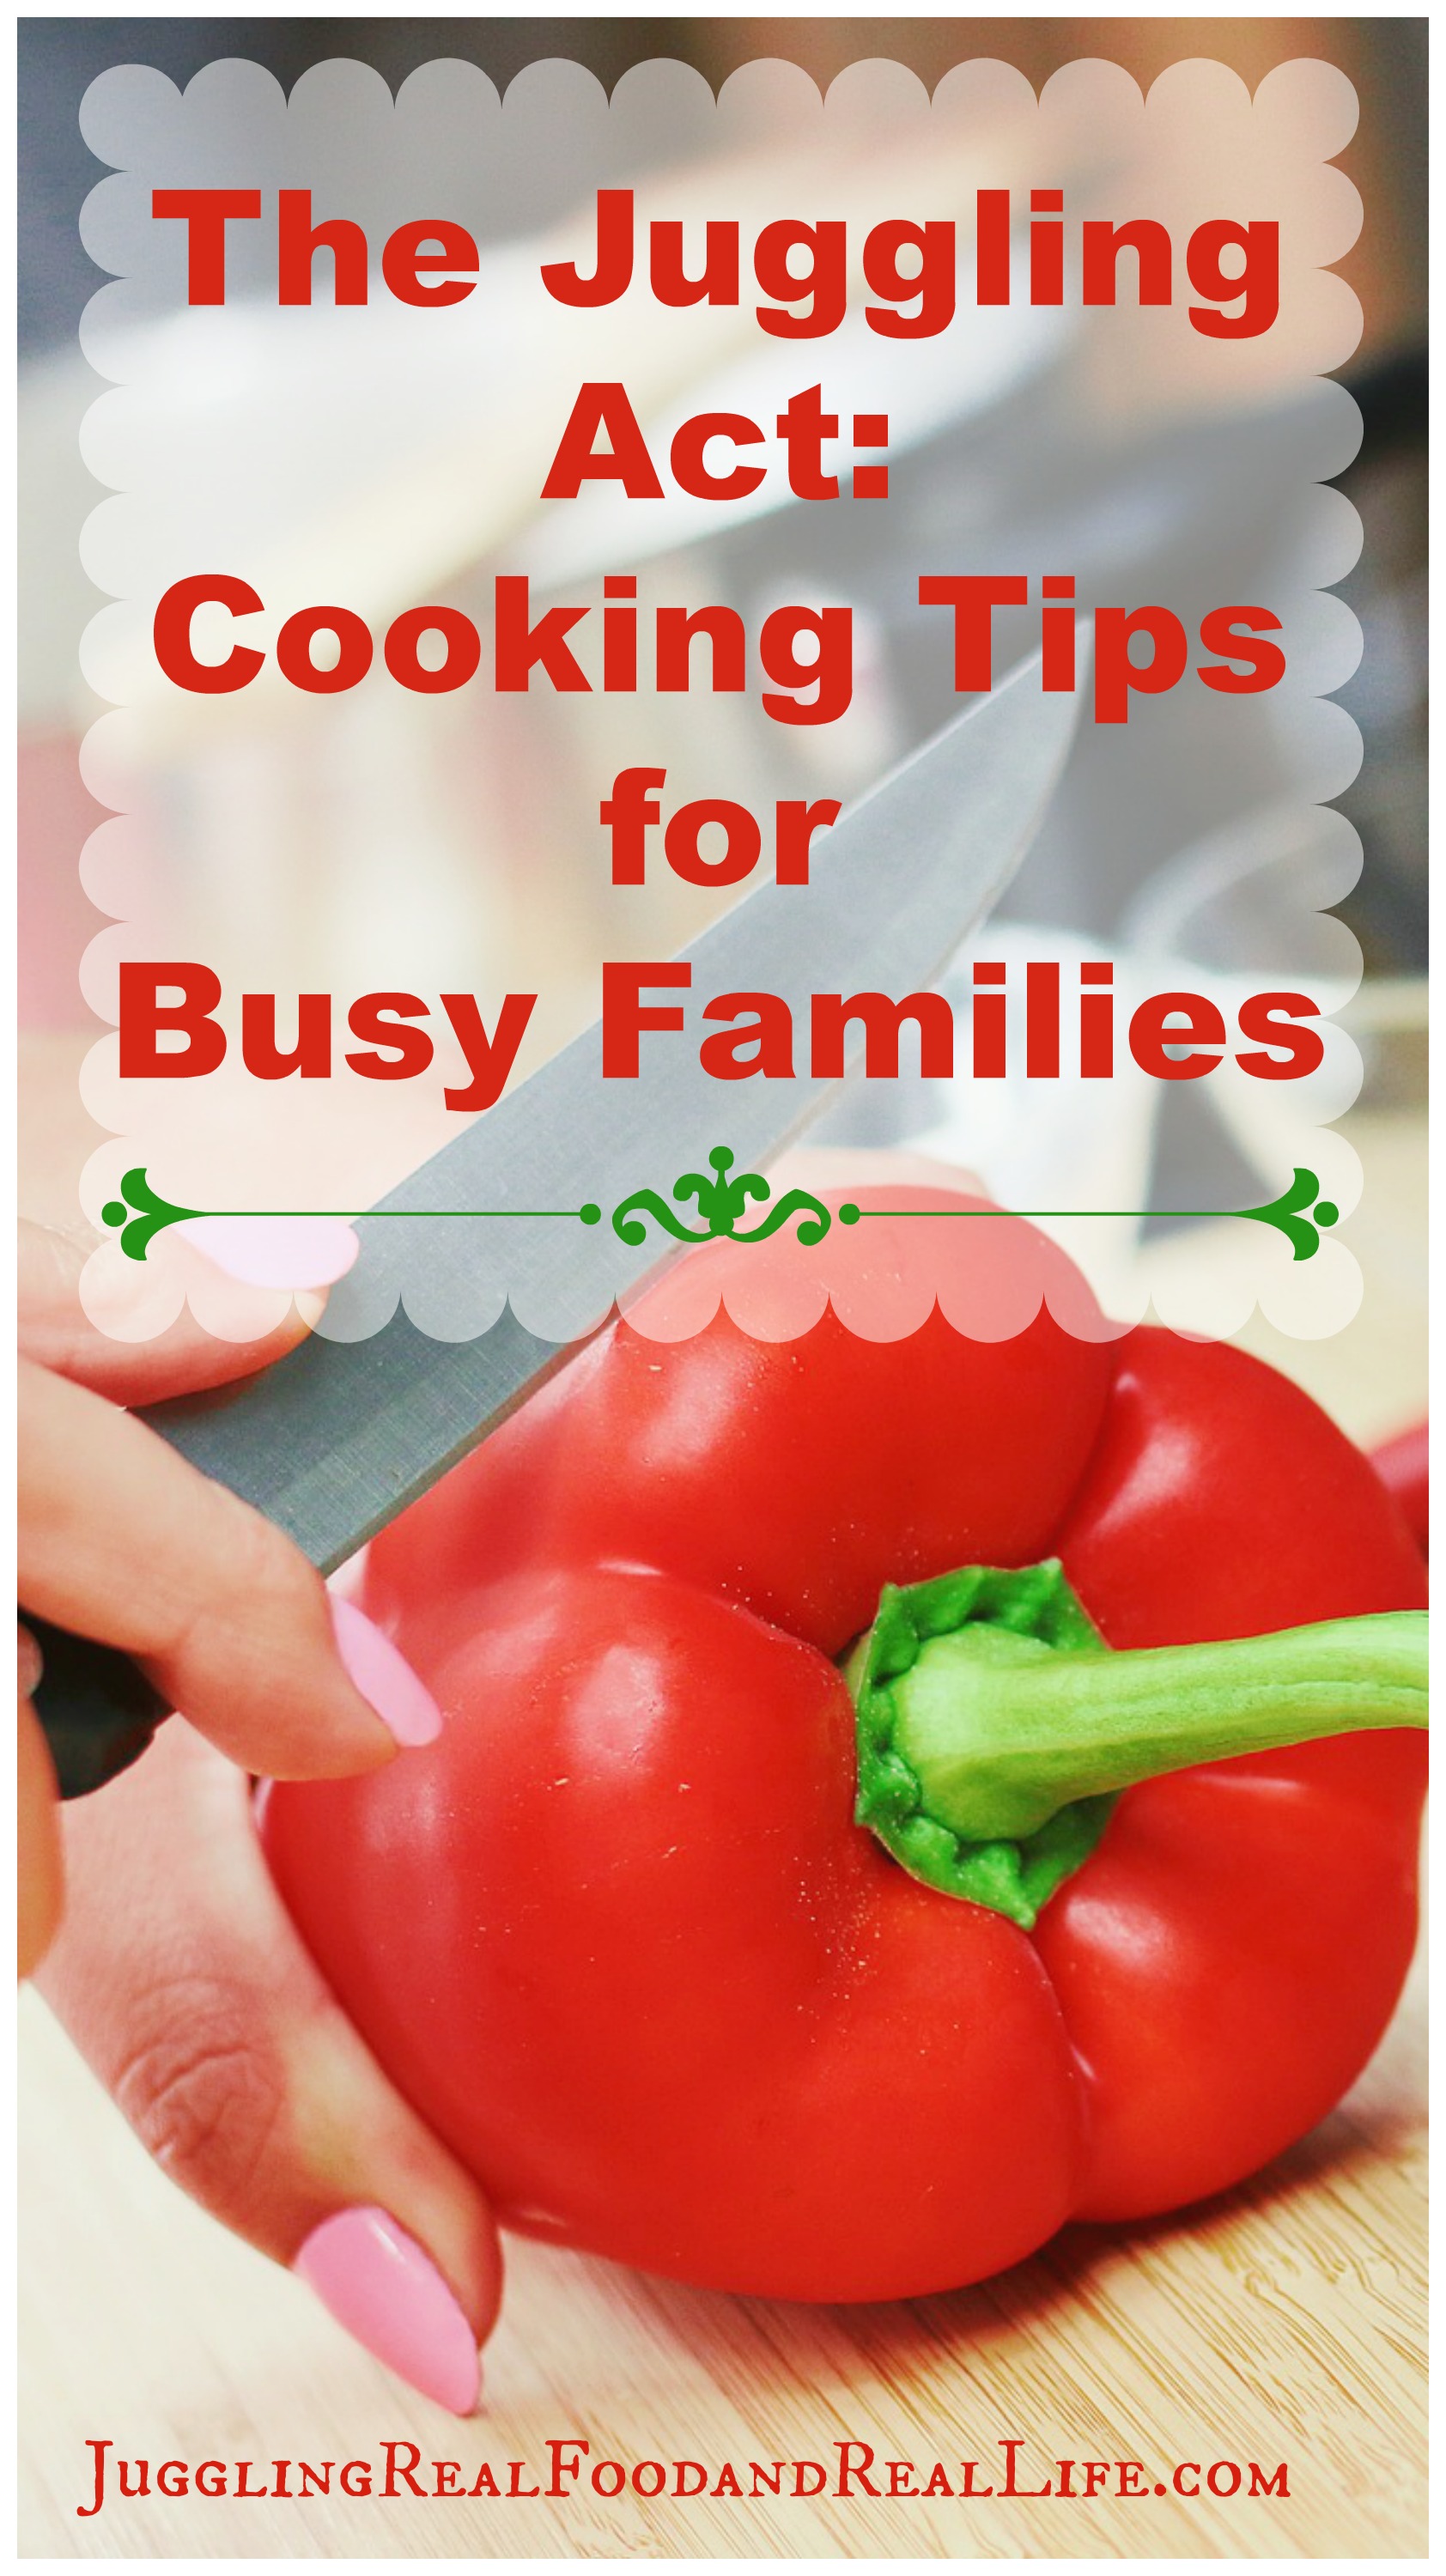 The Juggling Act: Cooking Tips For Busy Families